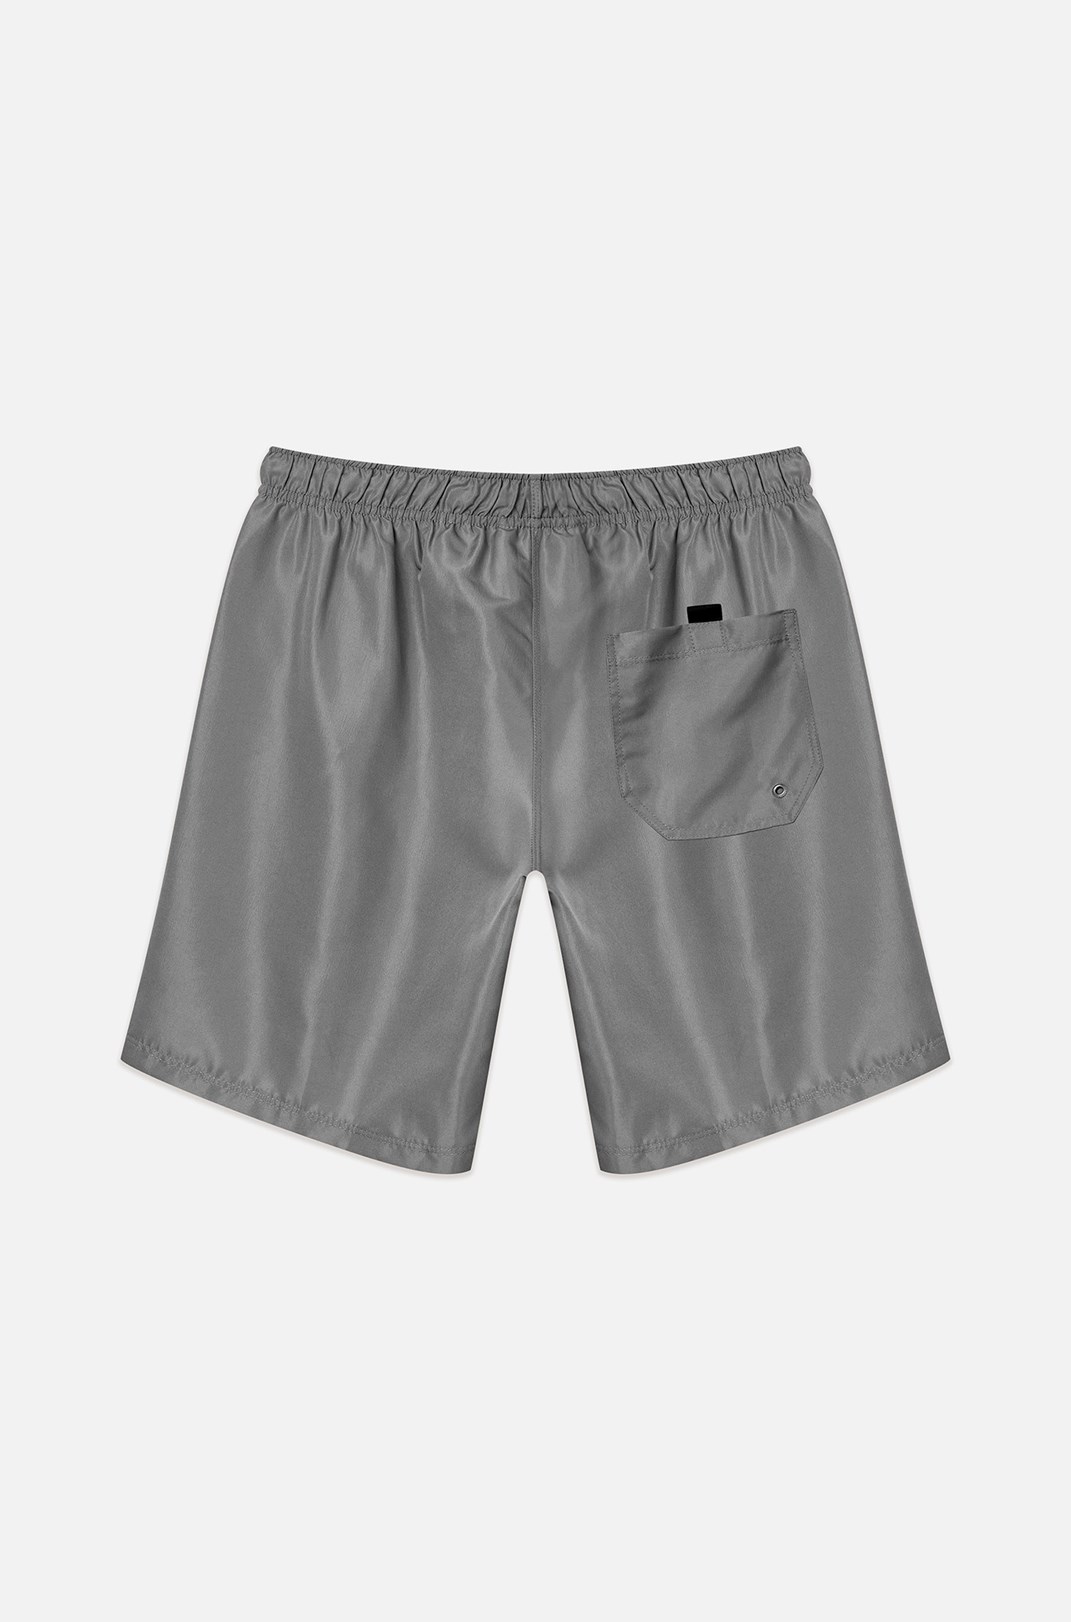 Shorts 7inches Approve Spare Star Cinza Cinza